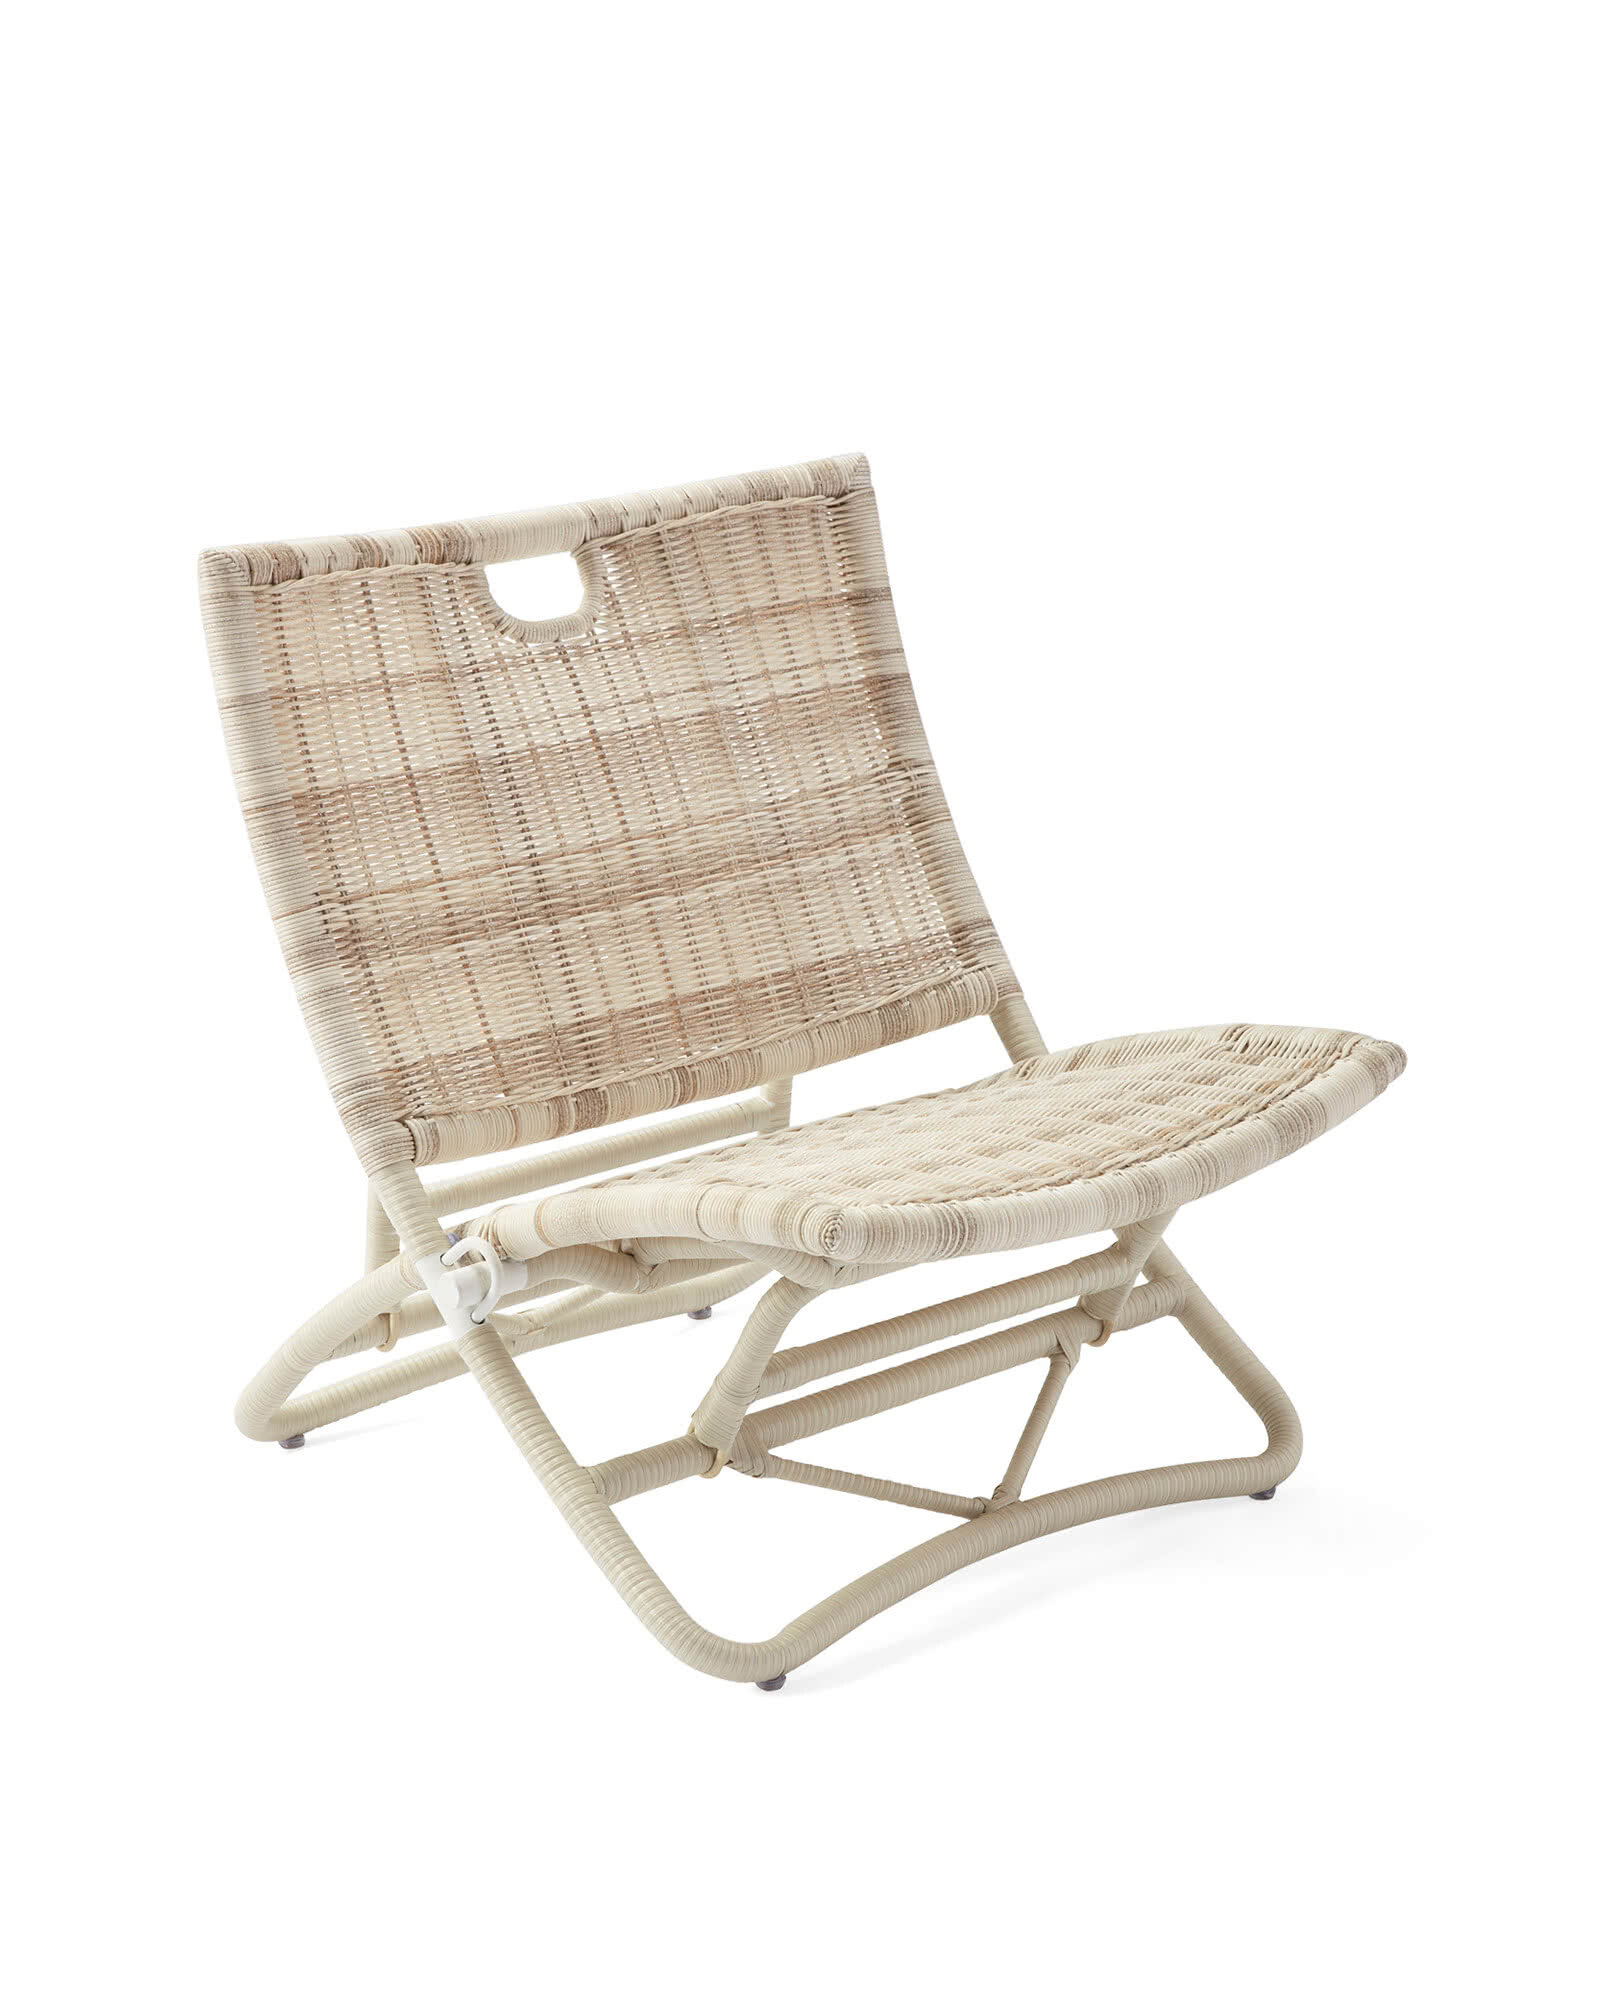 Palisades Outdoor Chair - Driftwood - Serena and Lily.jpeg